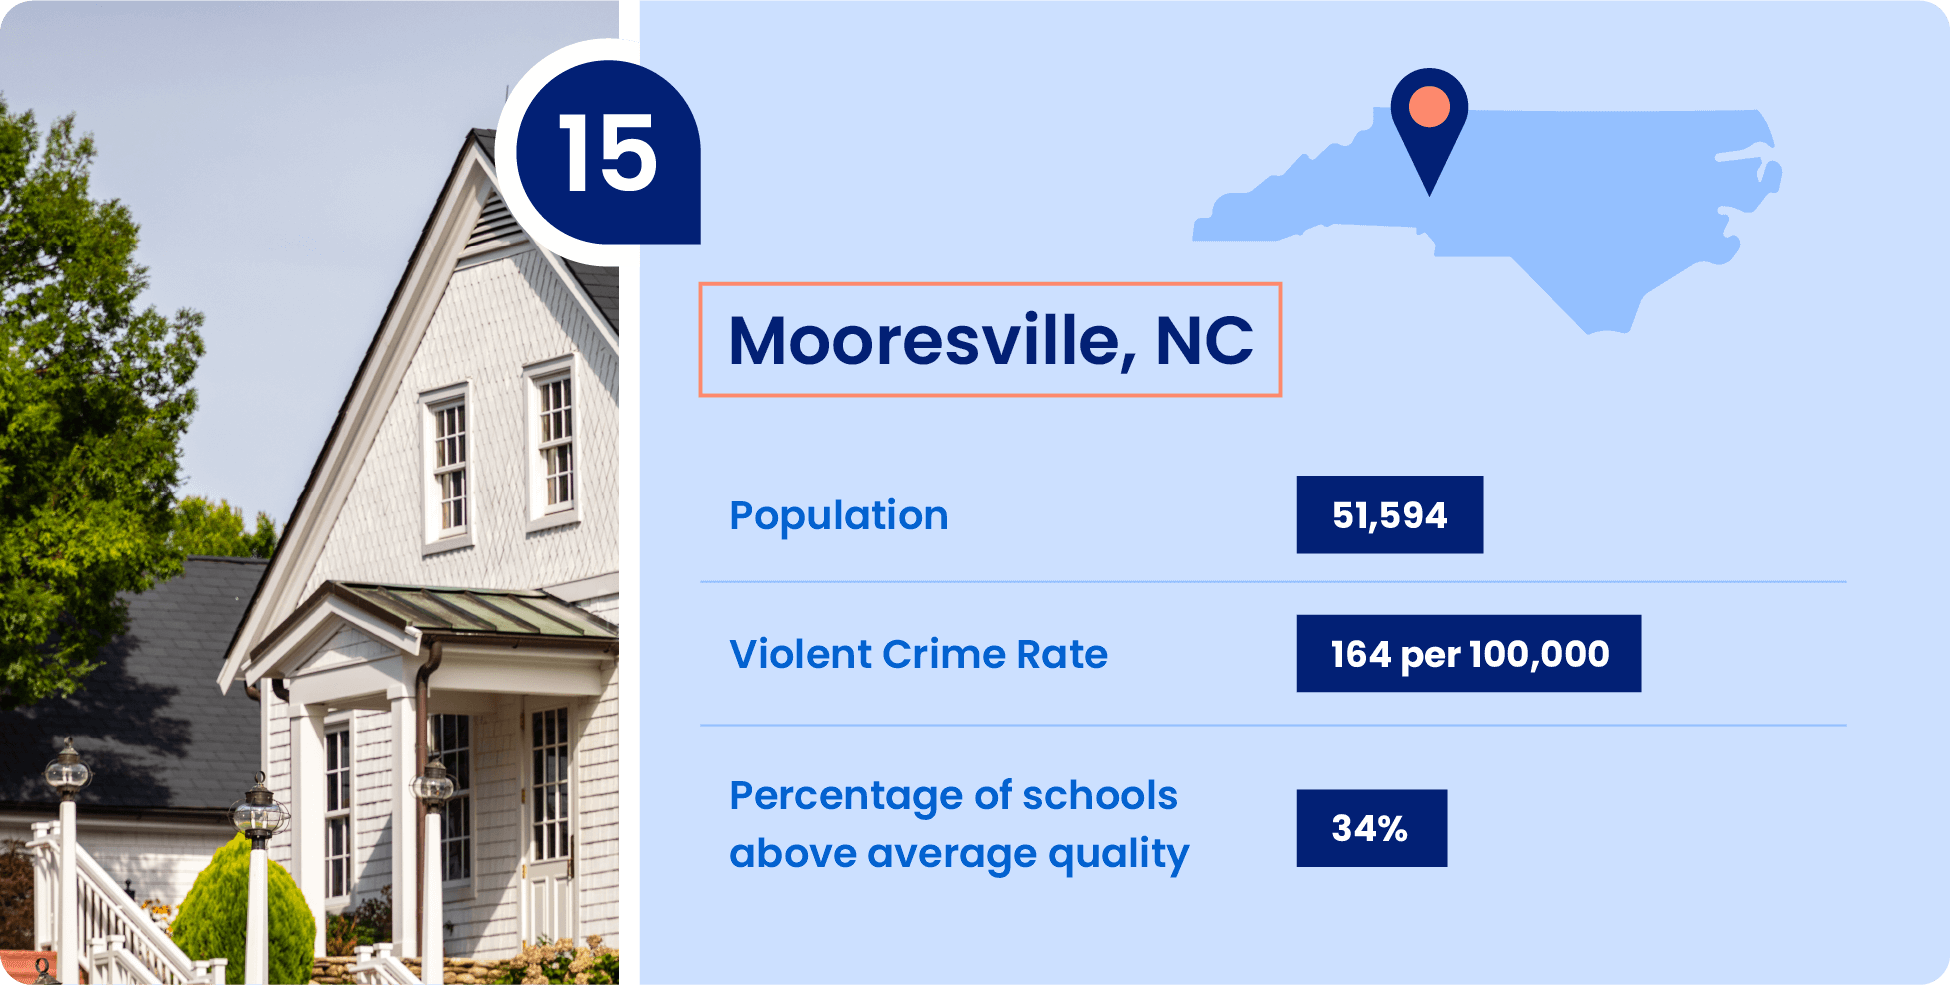 Image shows key information that make Mooresville, North Carolina a great place to raise a family.